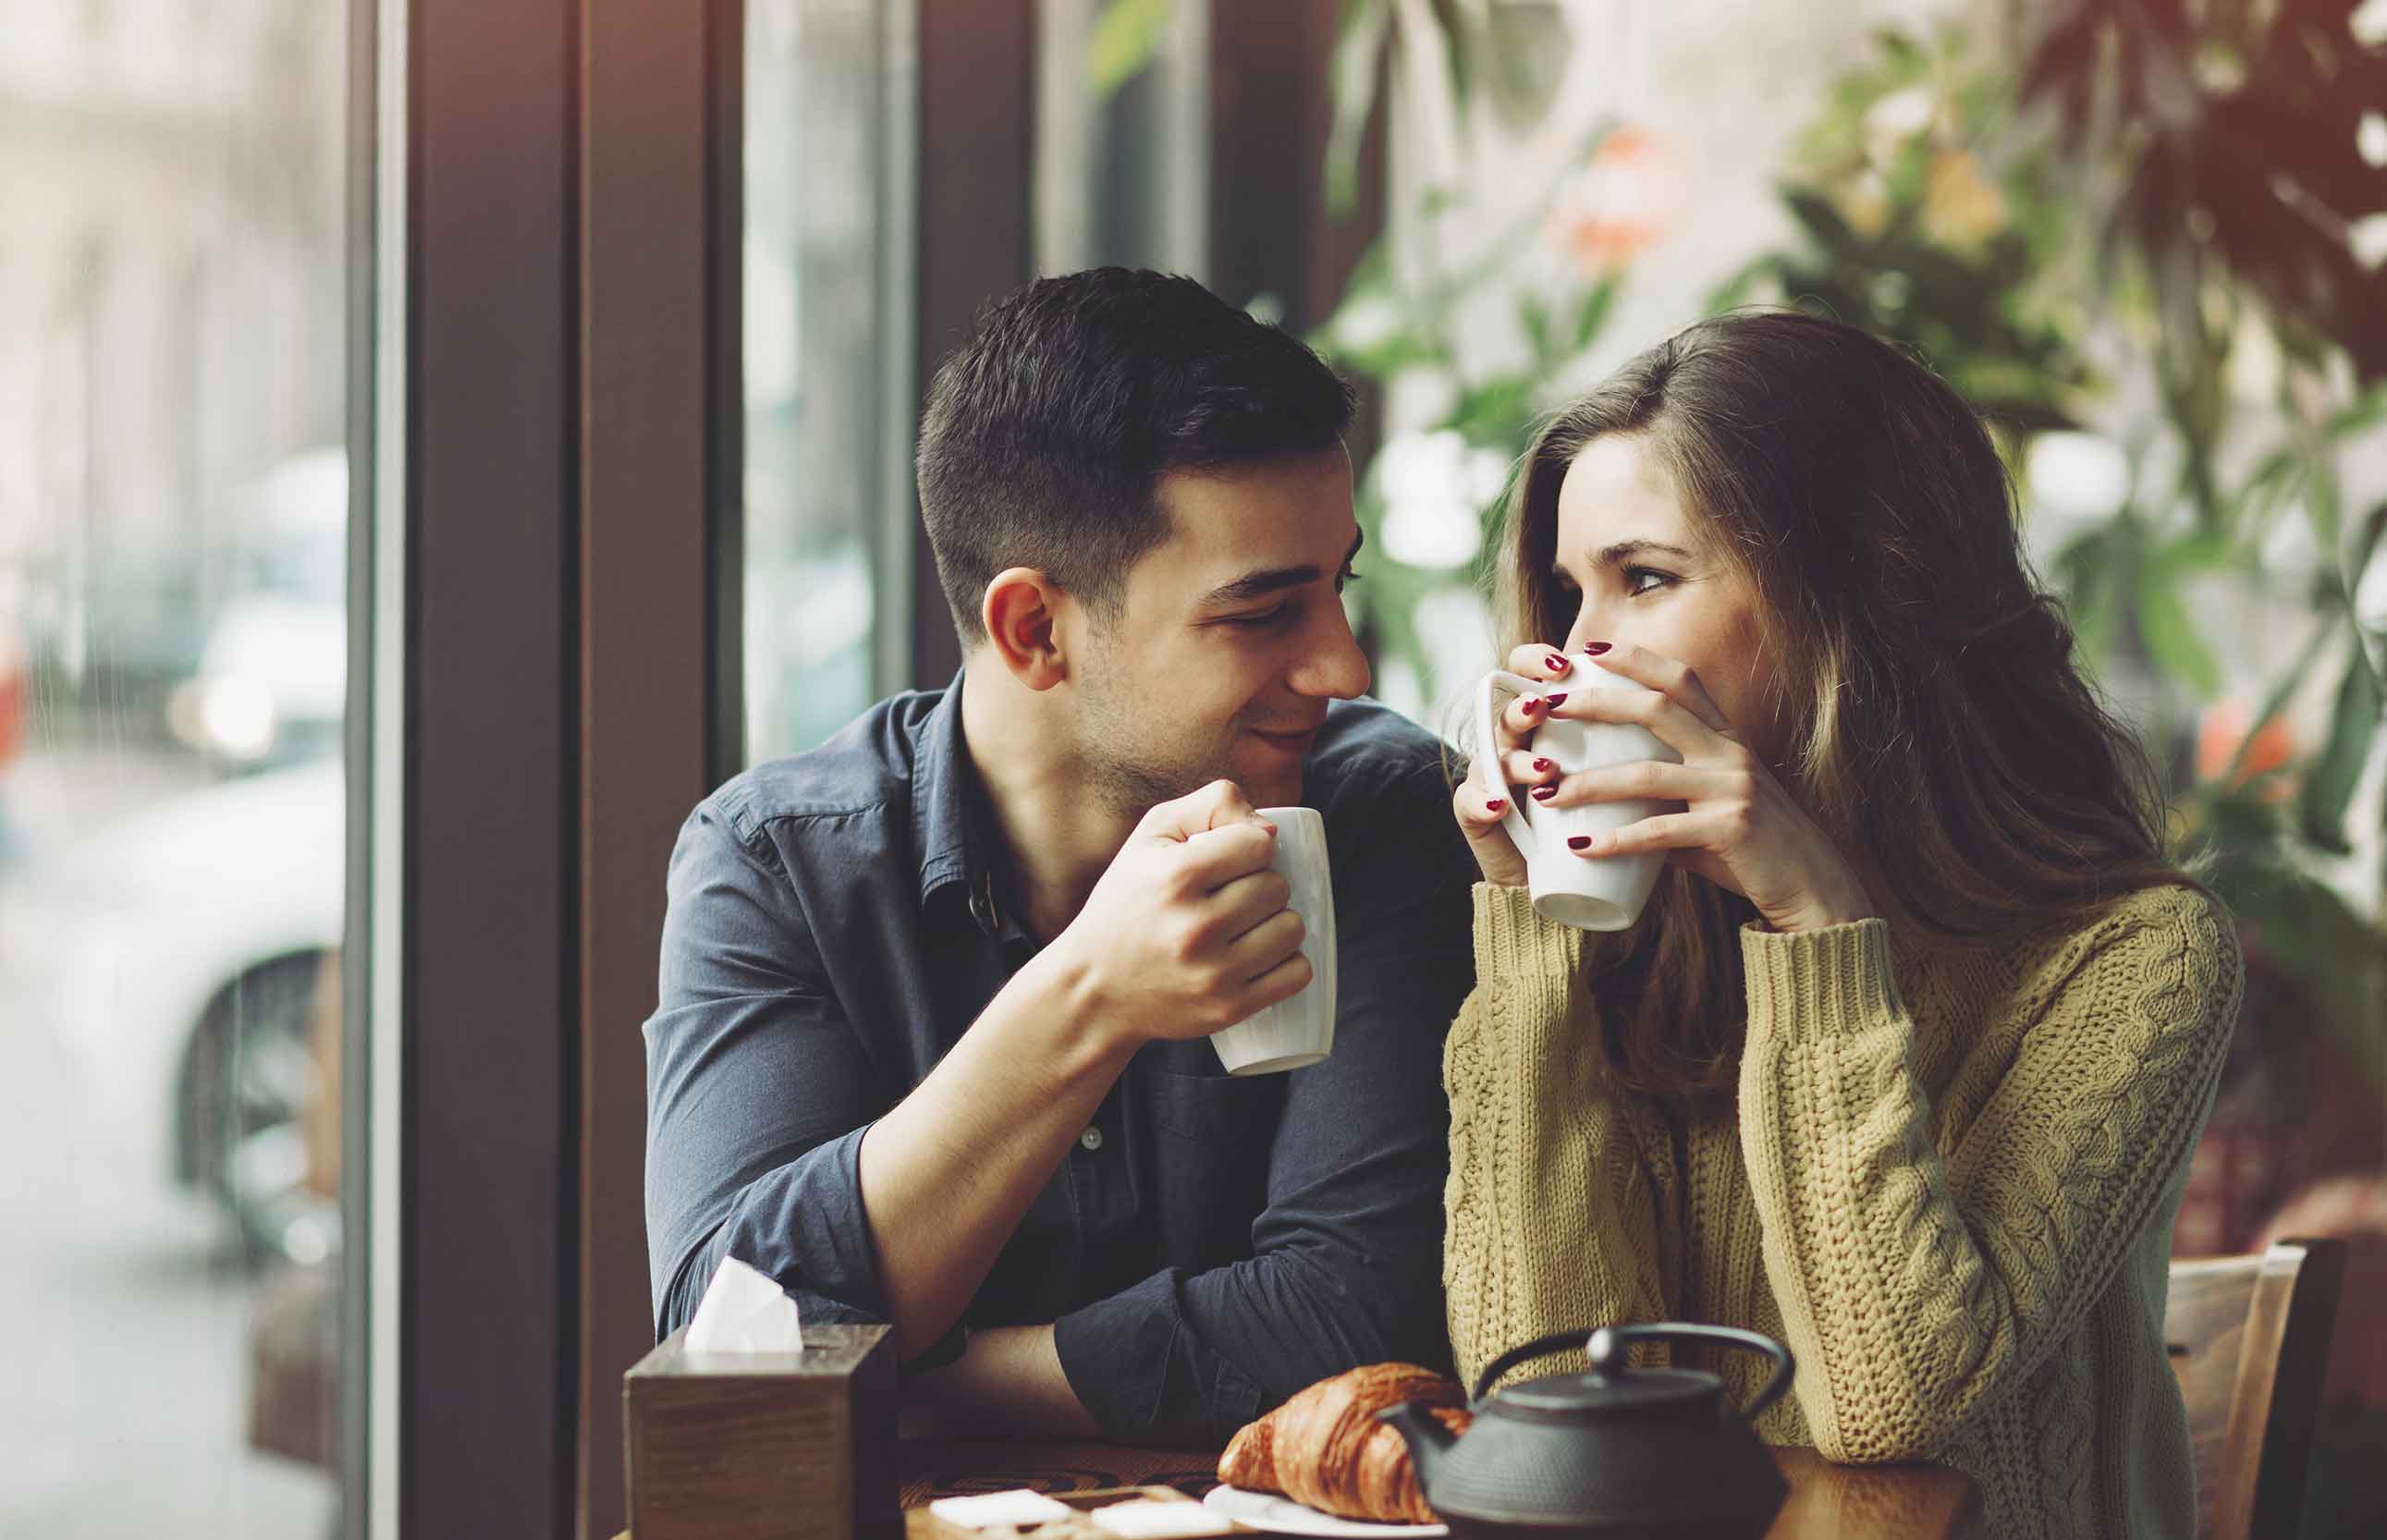 If the thought of discussing finances with a stranger let alone on a dating website makes you uneasy, here’s what you need to know.